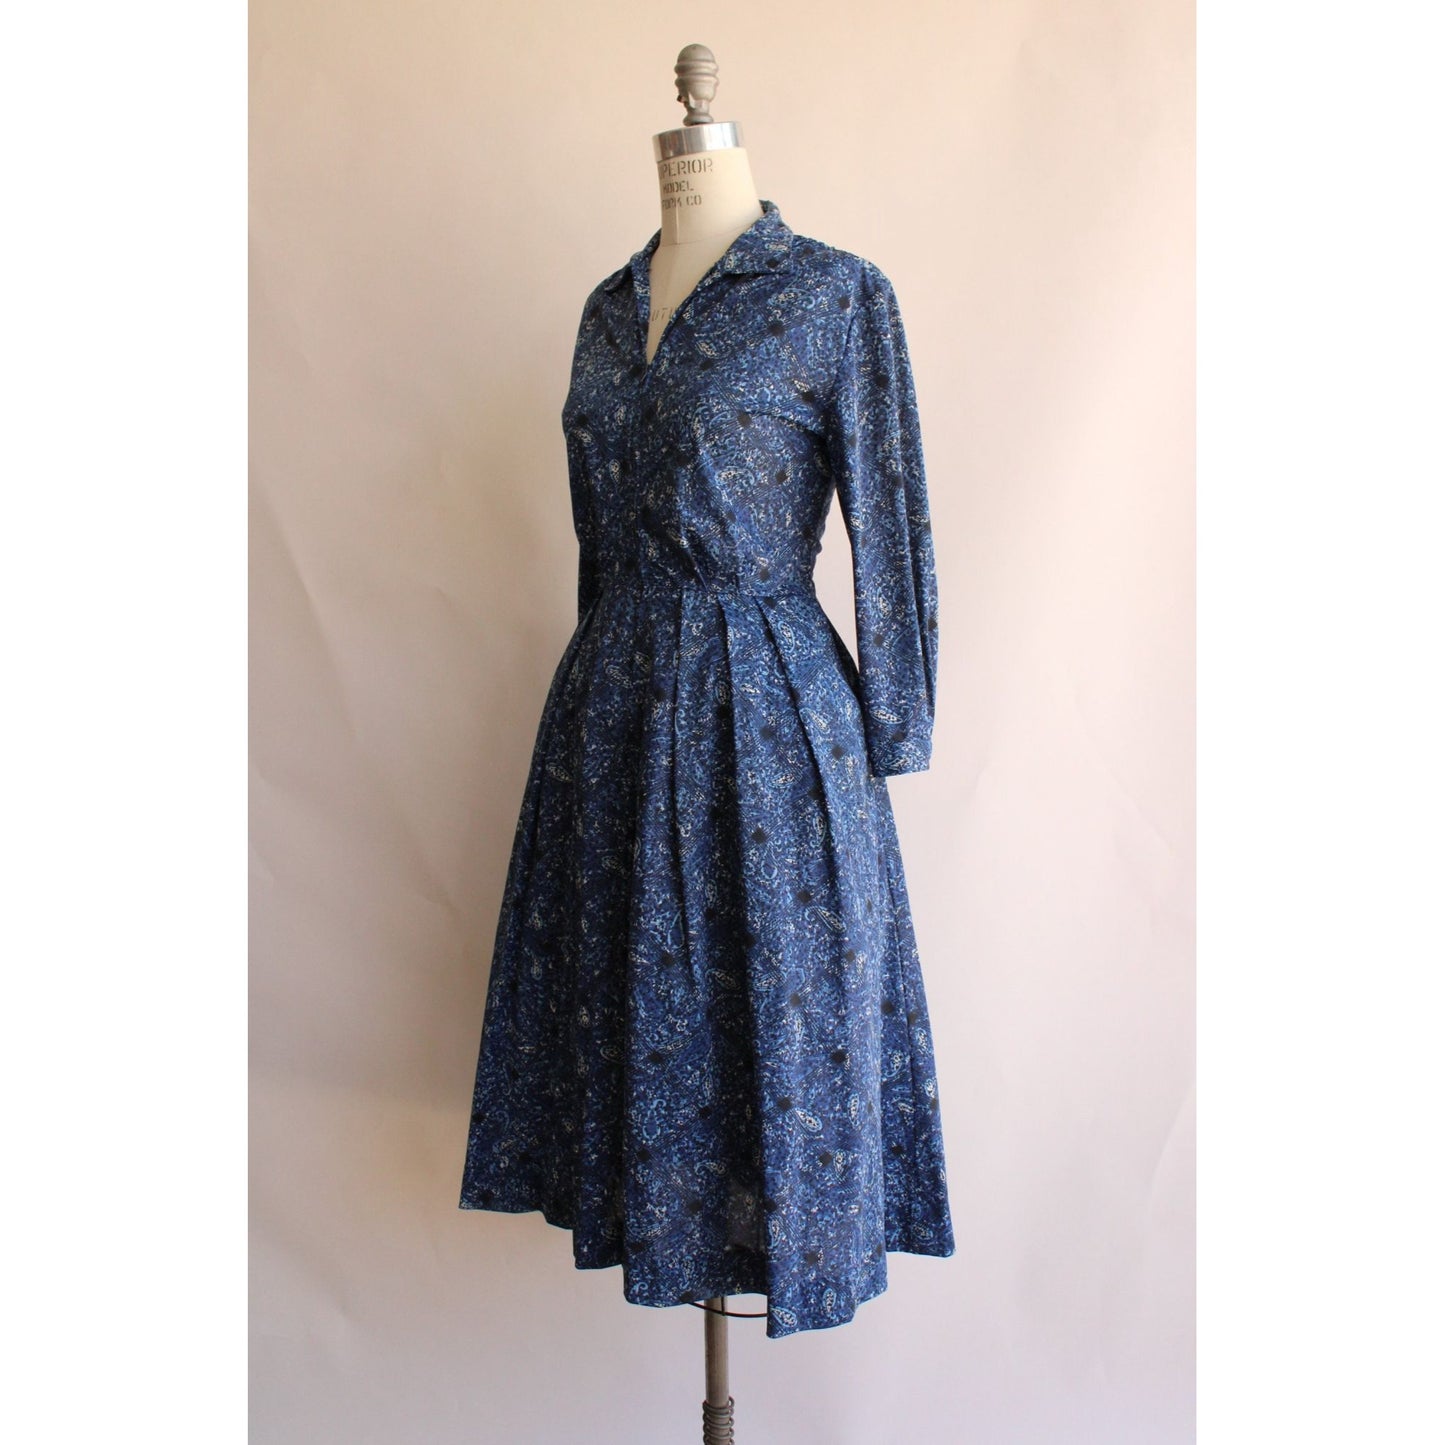 Vintage 1950s Dress With Pockets In a Blue Paisley Print